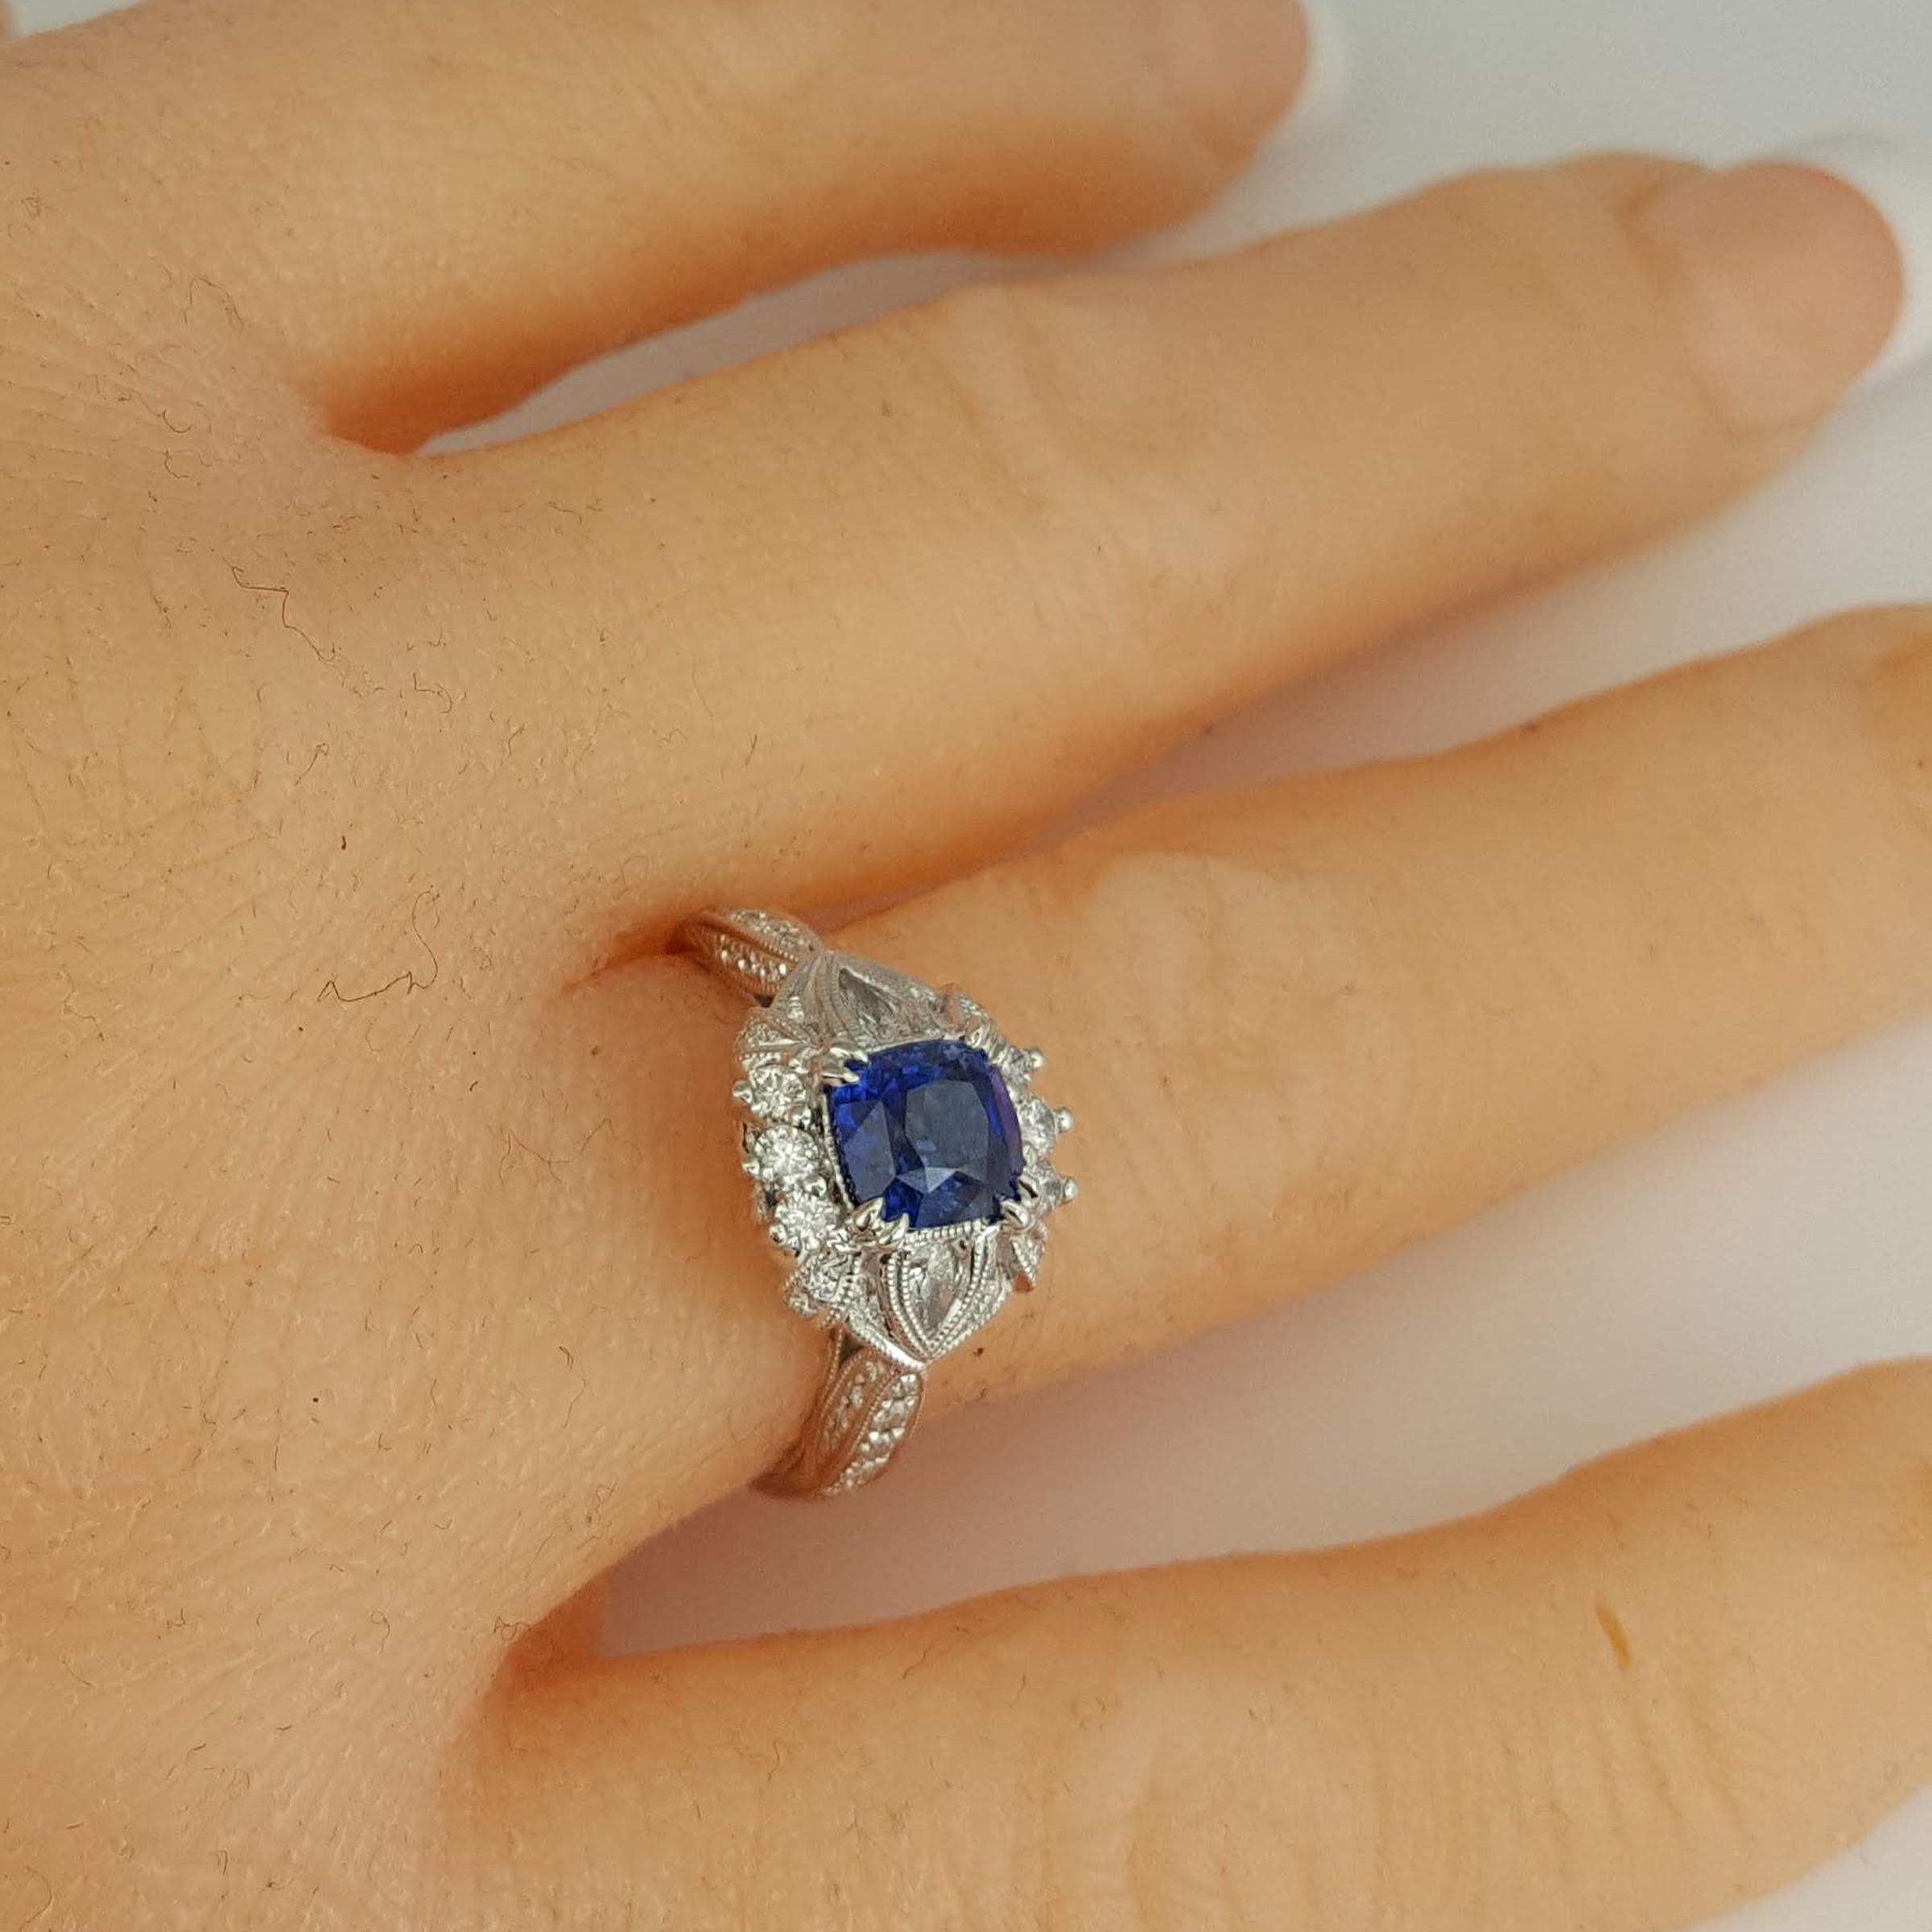 1.6 Carat Cushion Cut Blue Sapphire Ring with 0.63 Carat Natural Diamond ref1364 For Sale 1